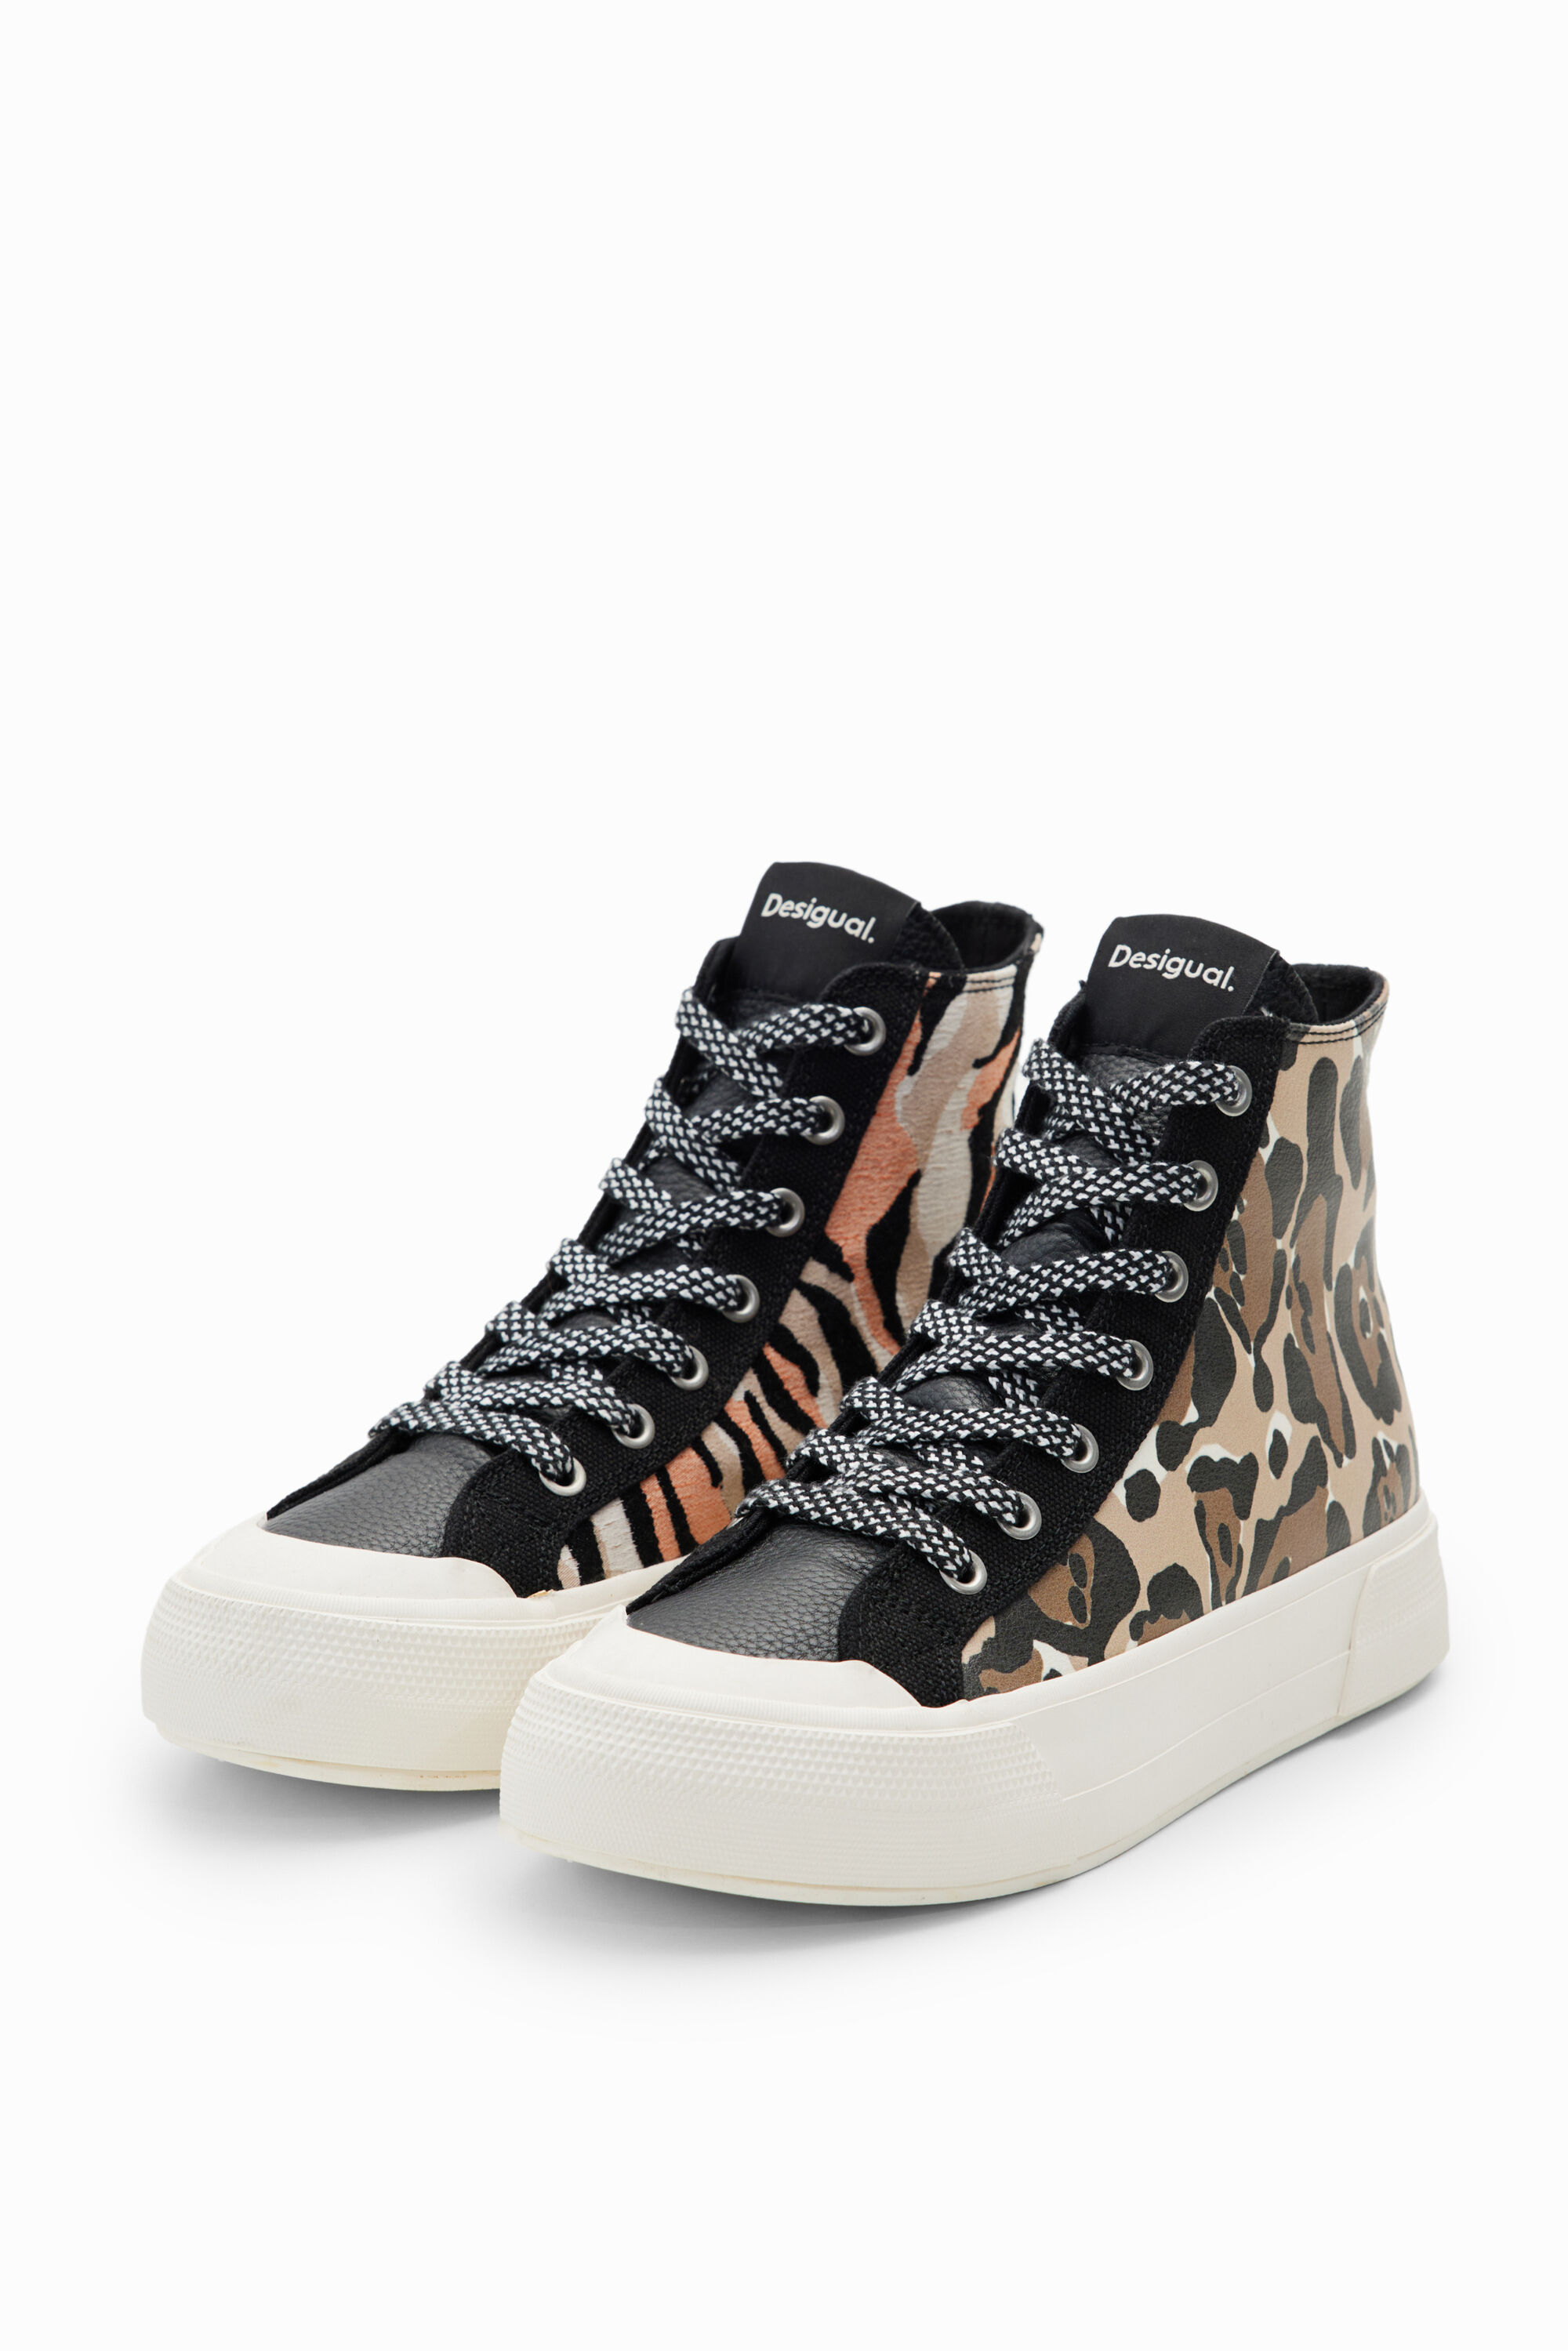 High-top animal print sneakers - MATERIAL FINISHES - 38